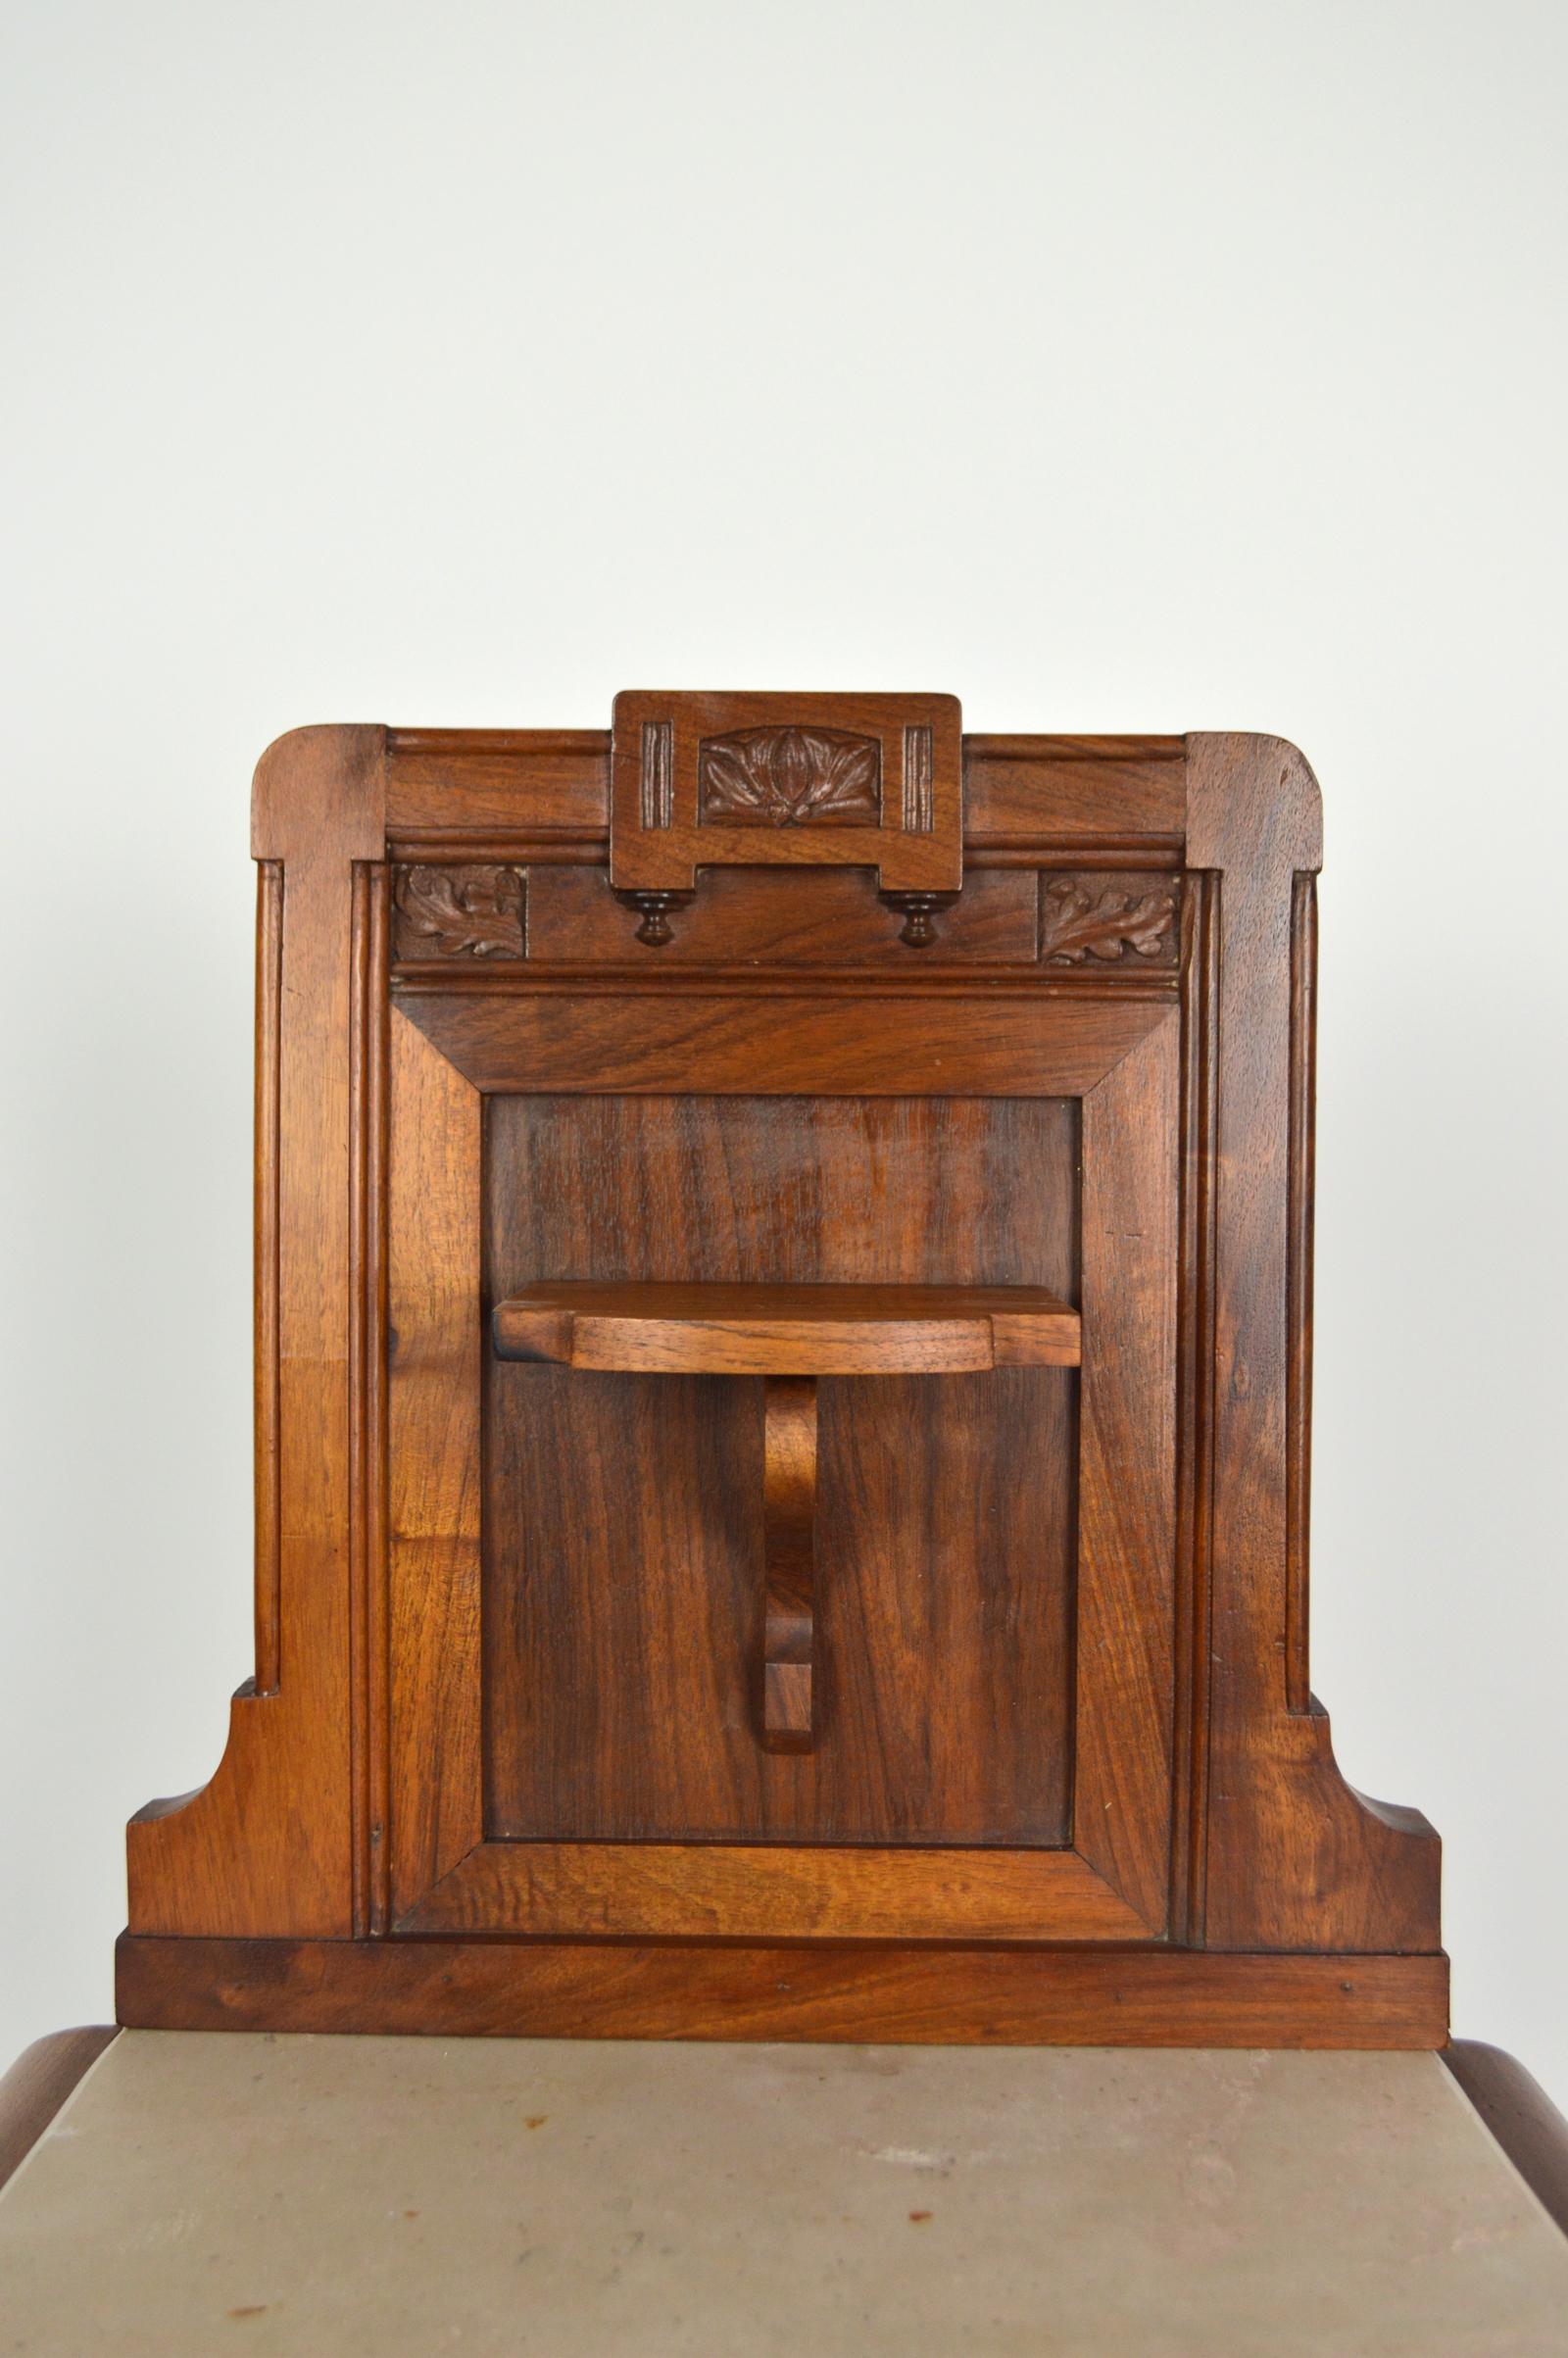 Italian Art Nouveau Carved Walnut Nightstand / Bedside Table with Marble Top, circa 1900 For Sale